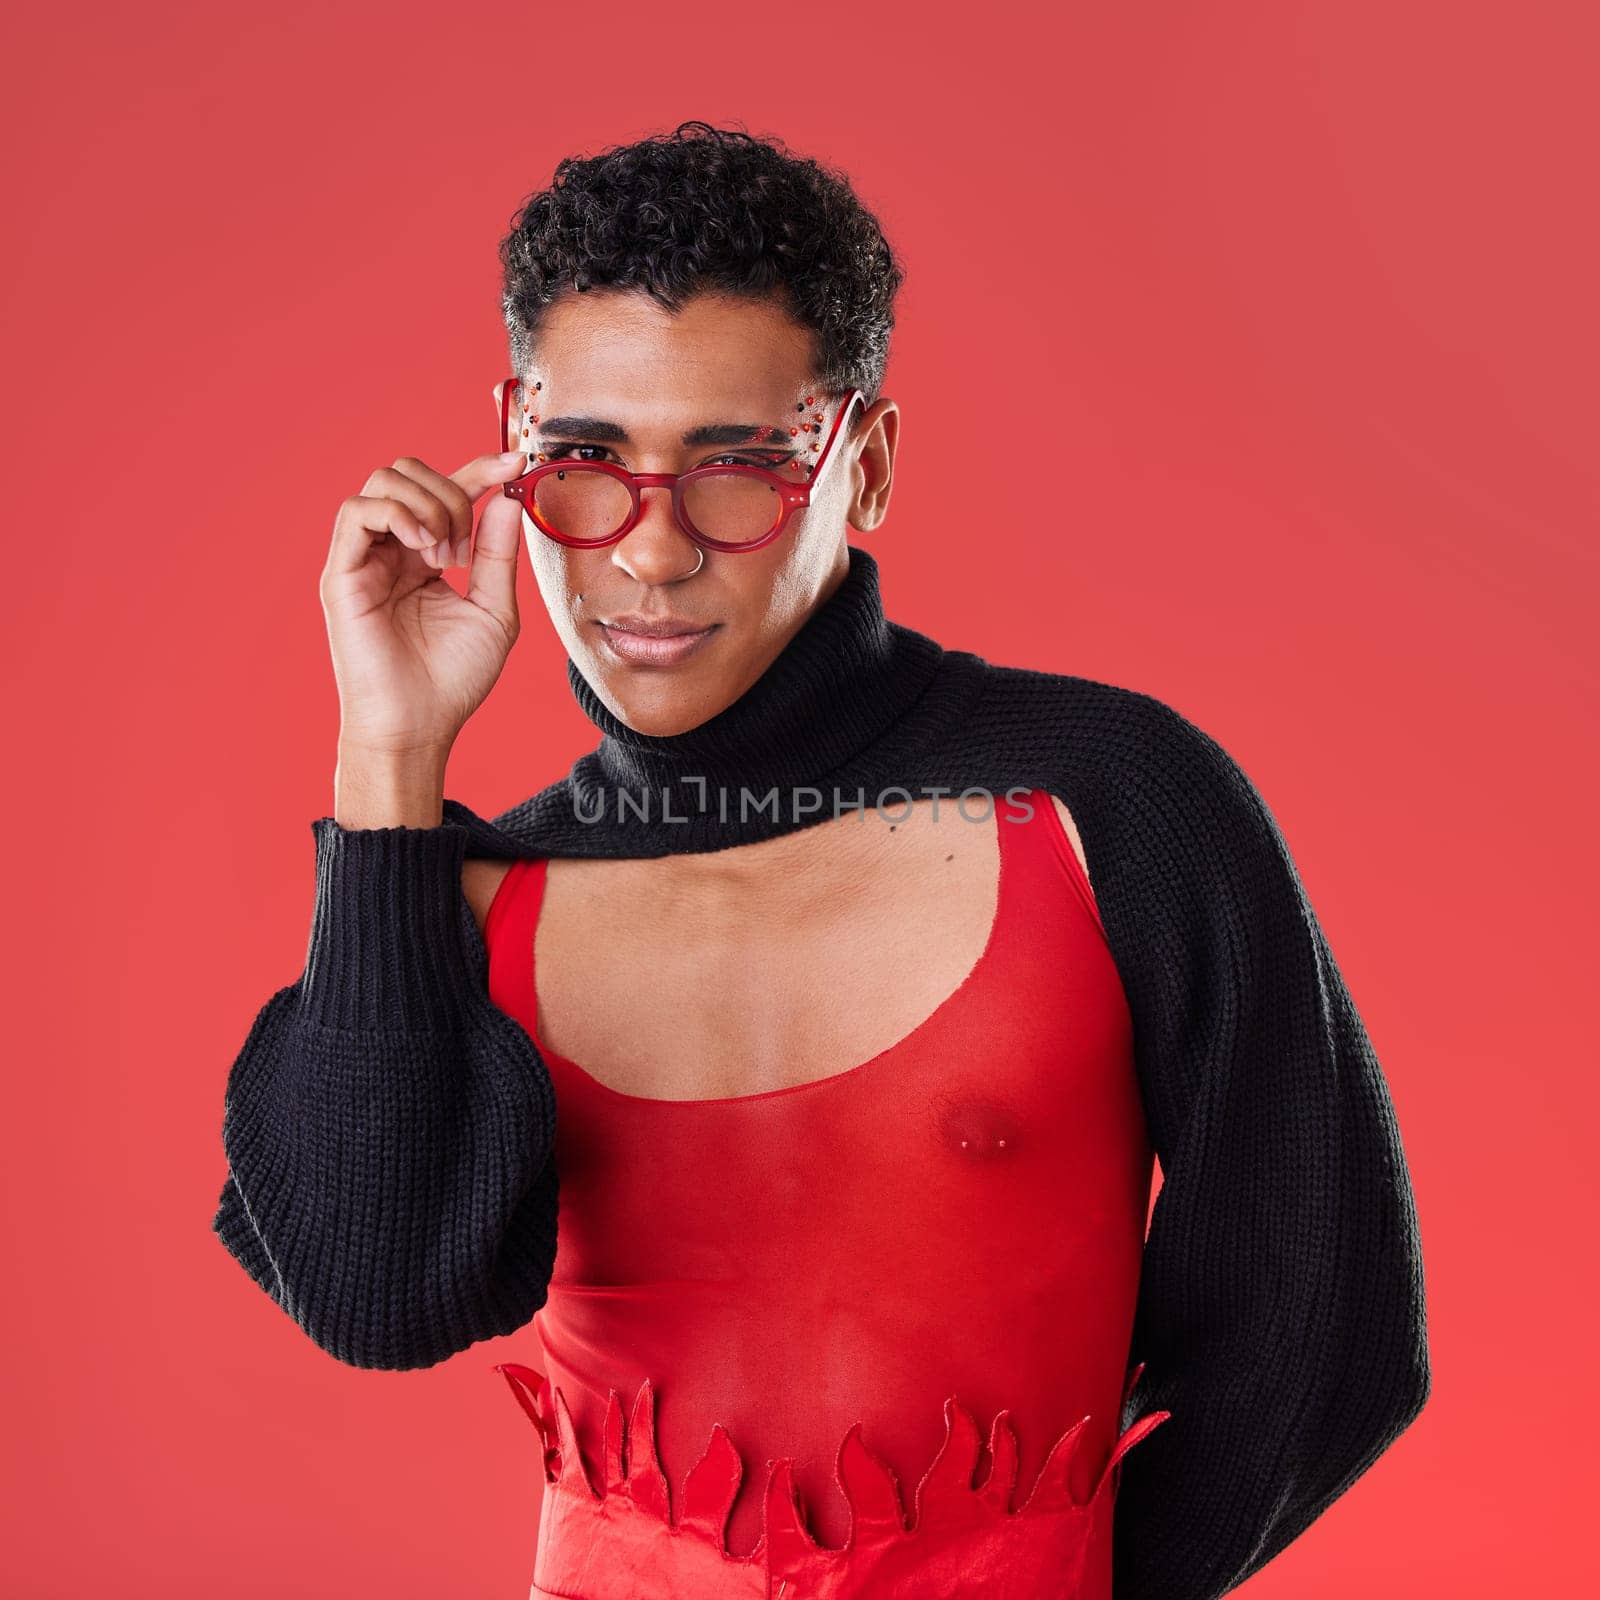 Fashion, portrait and gay man with glasses isolated on a red background in a studio. Lgbt, vision and stylish model person with fashionable eyewear, edgy clothes and funky style on a backdrop.